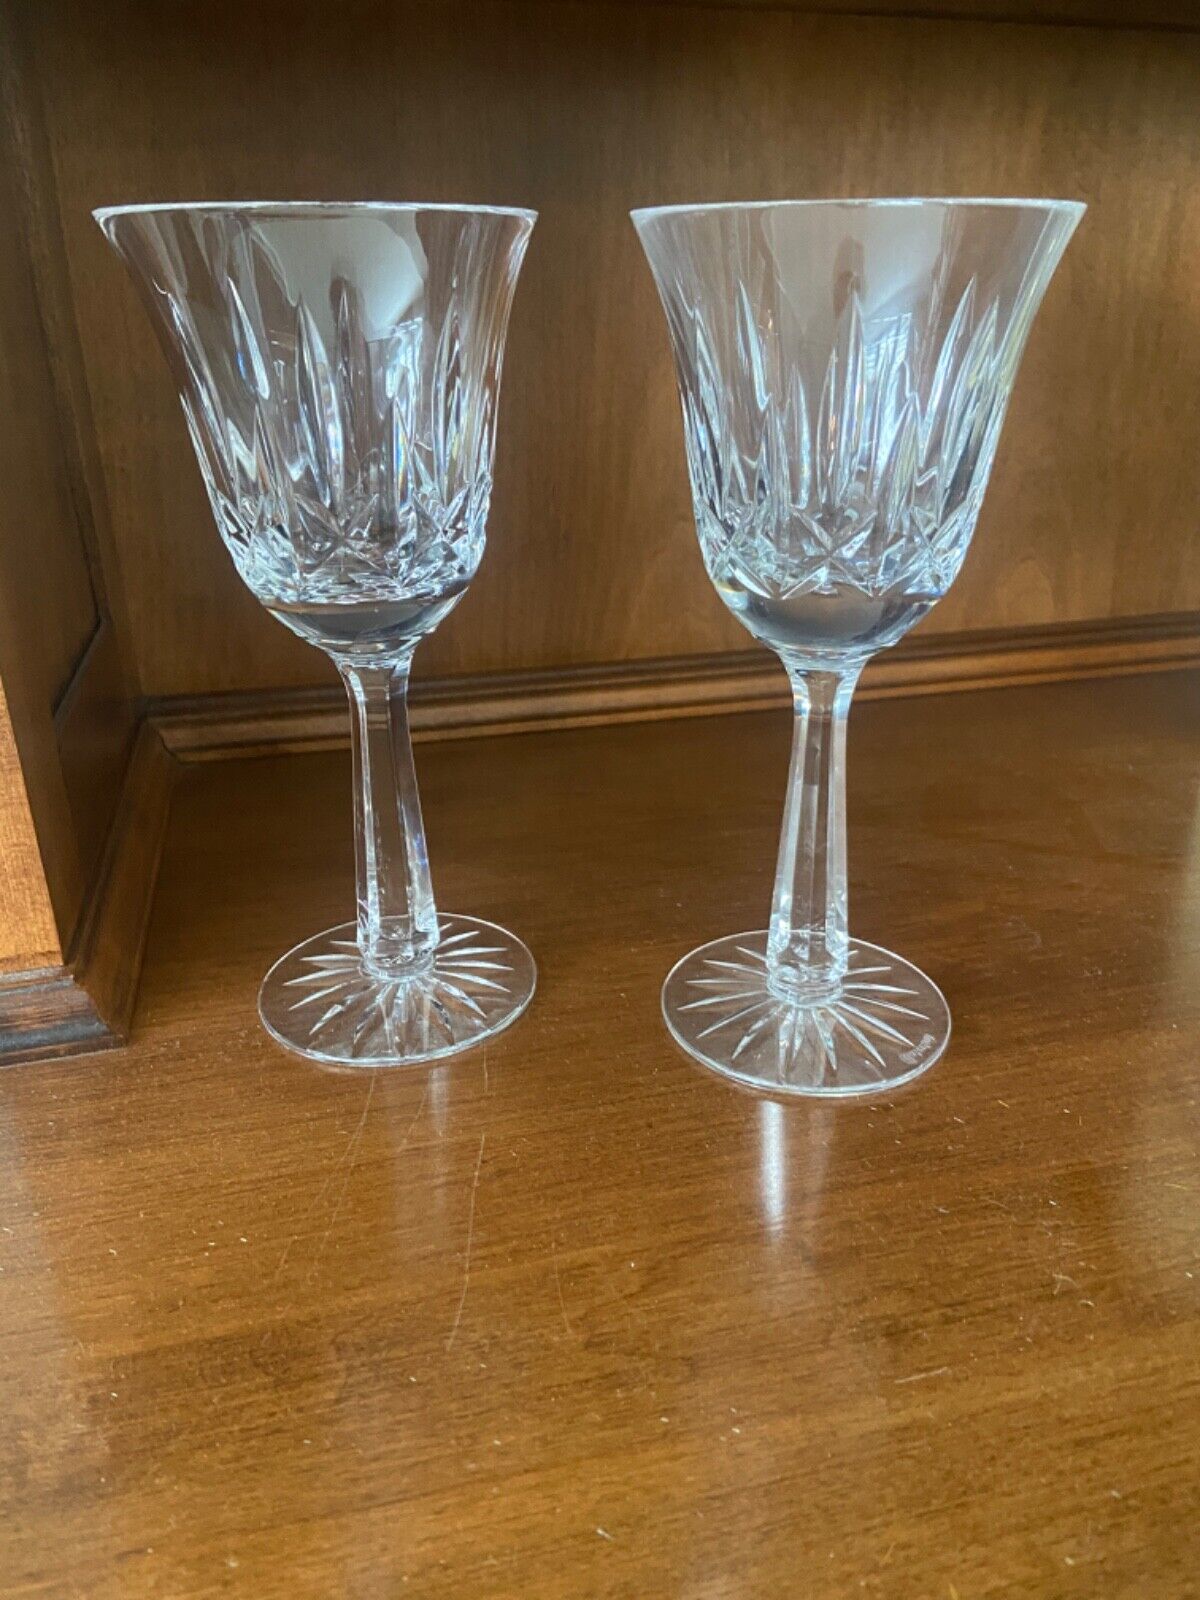 2 Waterford Crystal Ballyshannon Cut Claret Wine Glasses 6-7/8” Signed No Ledge